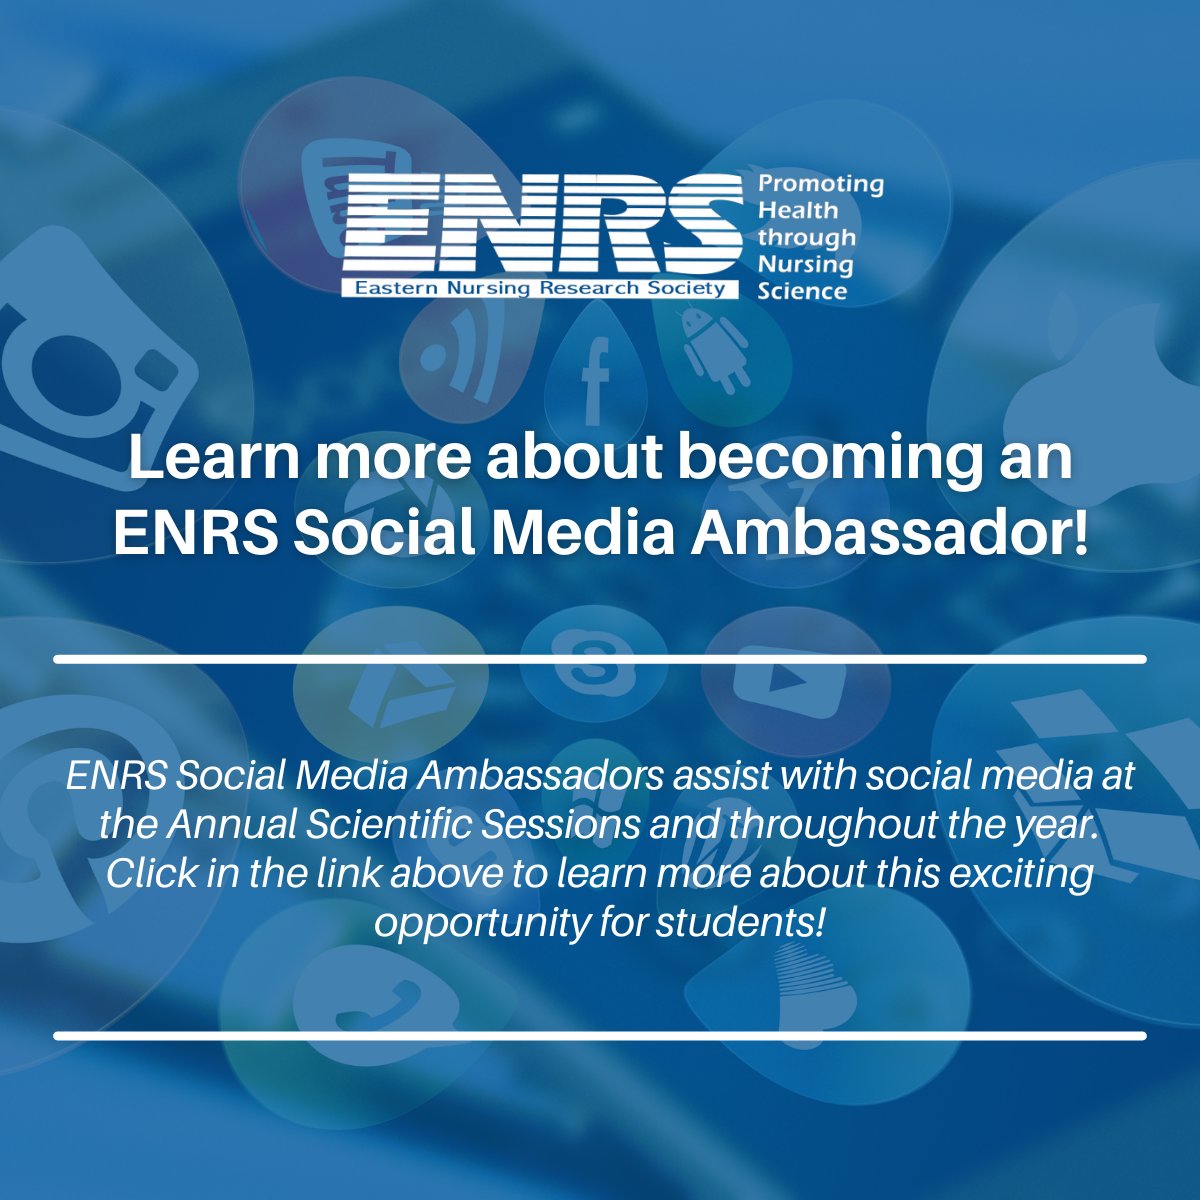 ENRS Social Media Ambassadors assist with social media at the Annual Scientific Sessions and throughout the year. Learn more about this exciting opportunity for students! Learn more: enrs.memberclicks.net/assets/docs/EN…